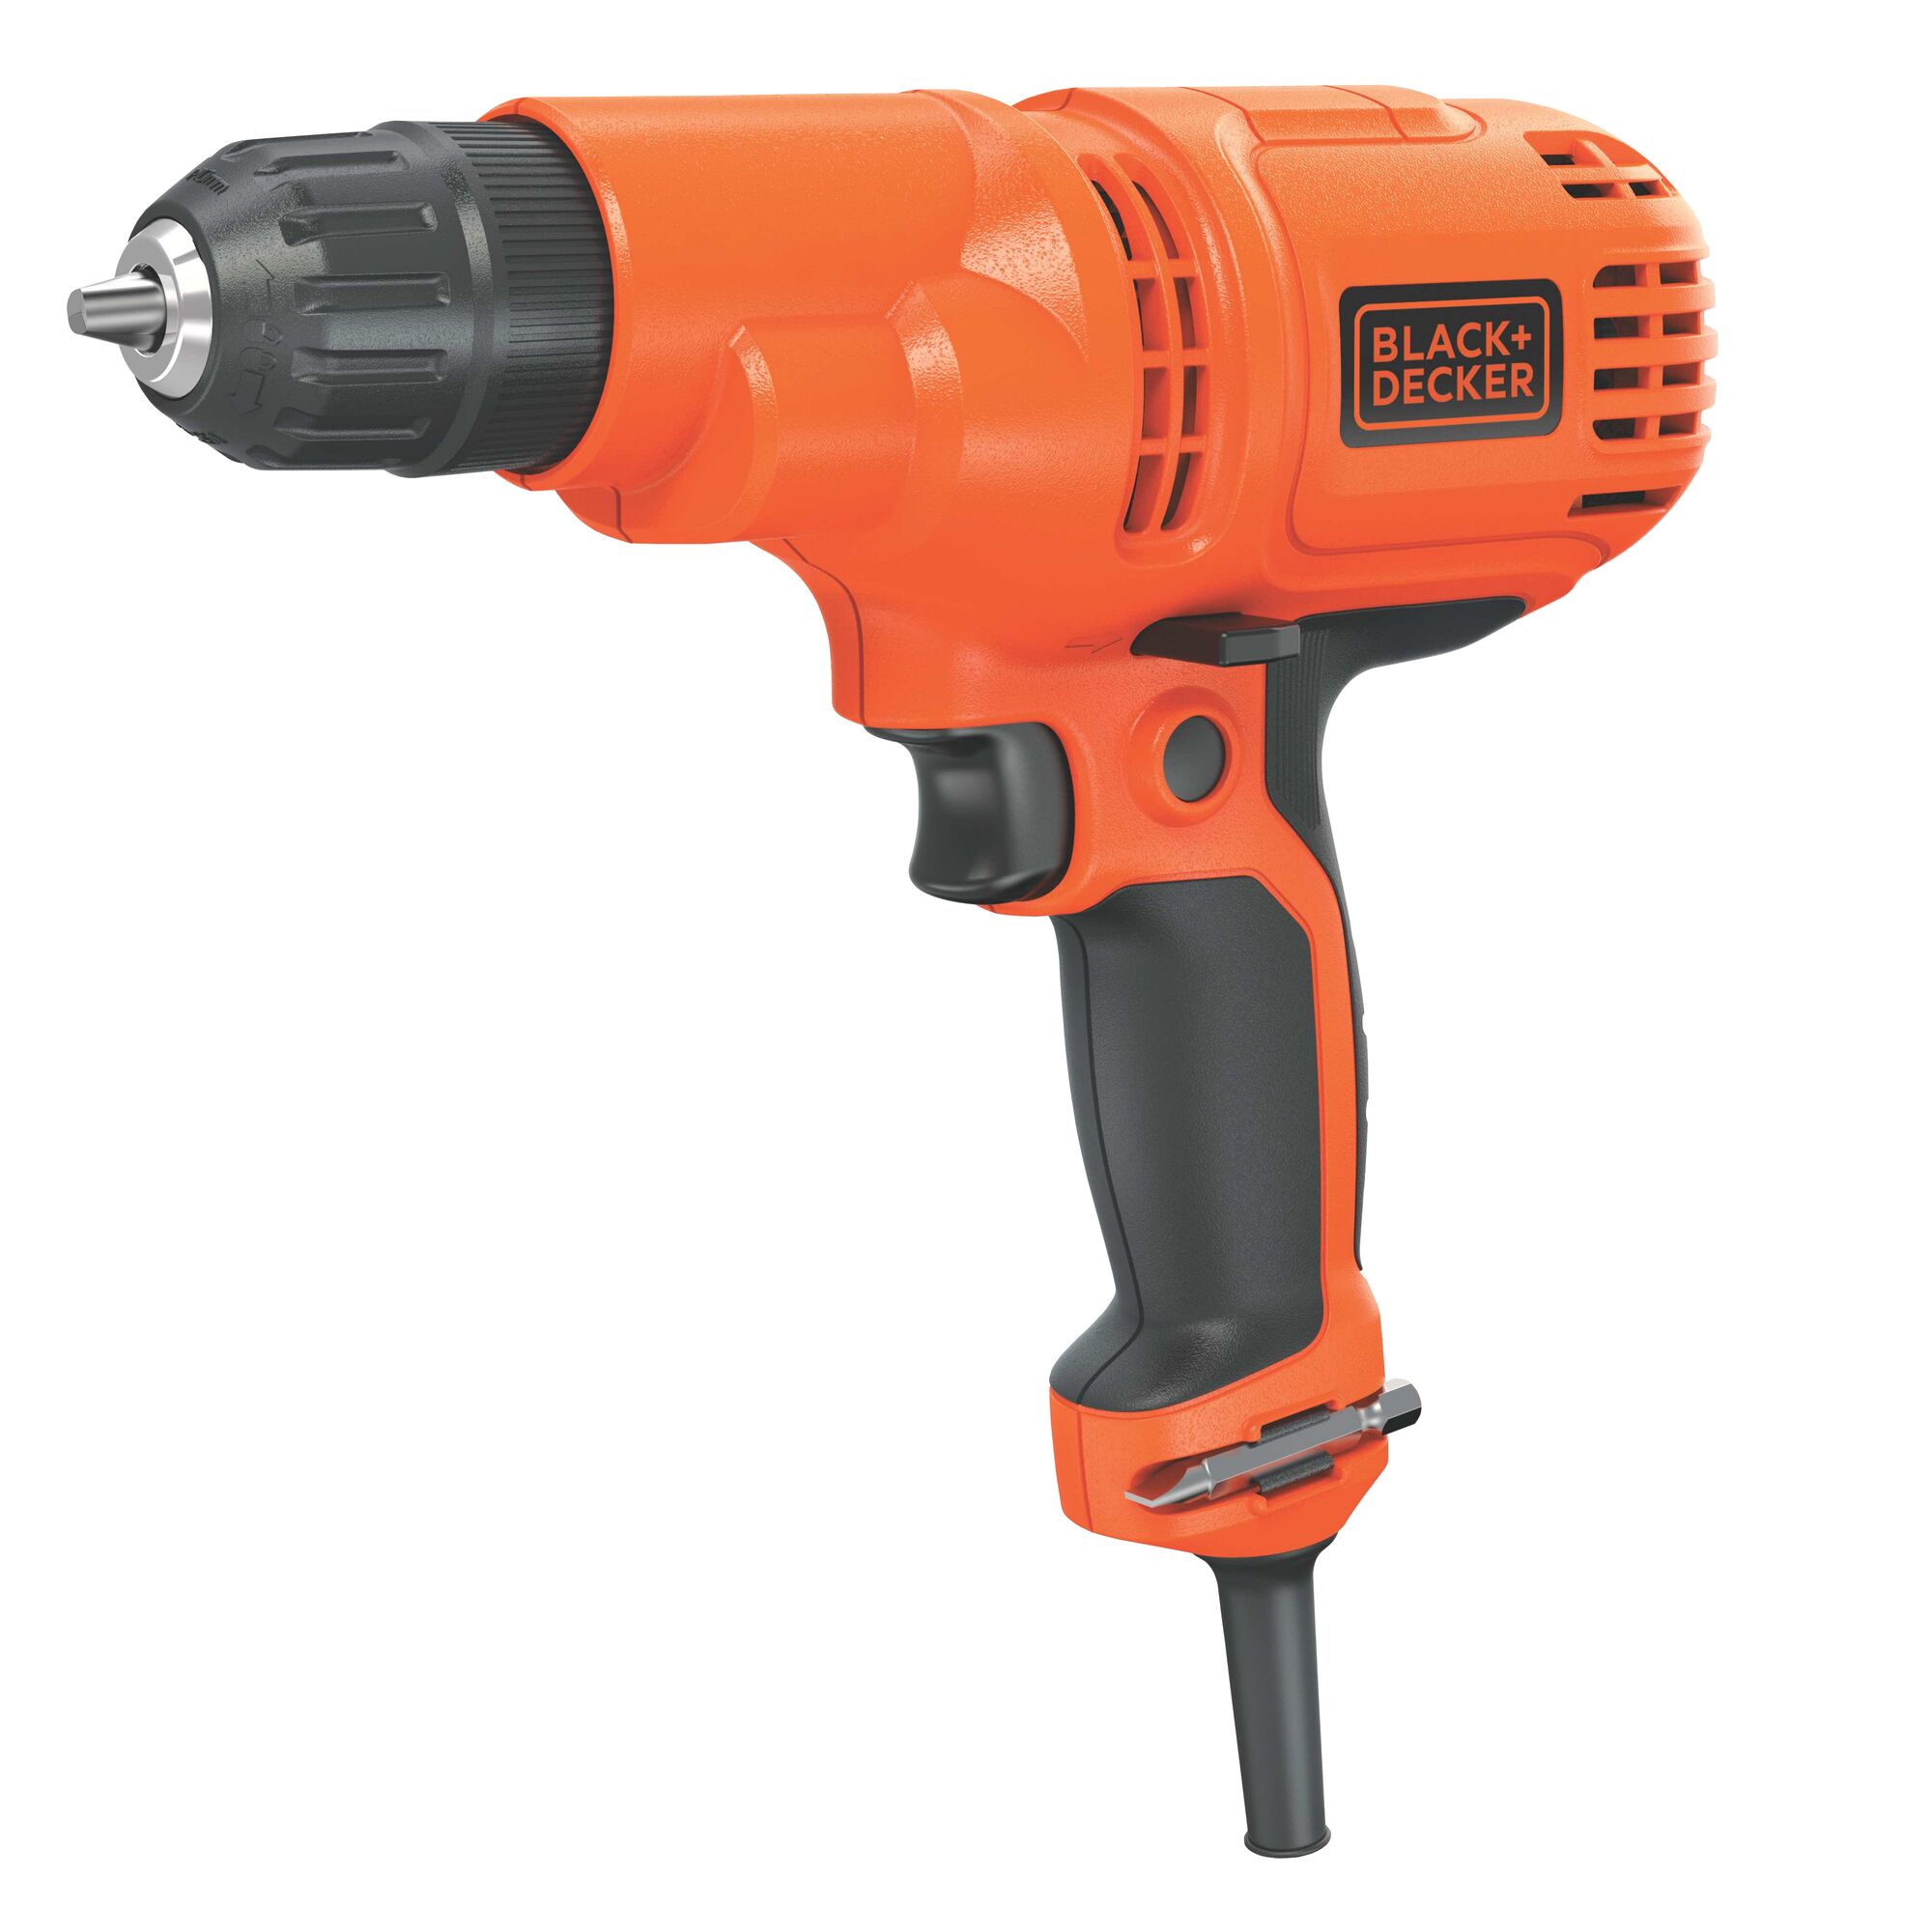 5.5 Amp 3 eighth inch Drill and Driver.